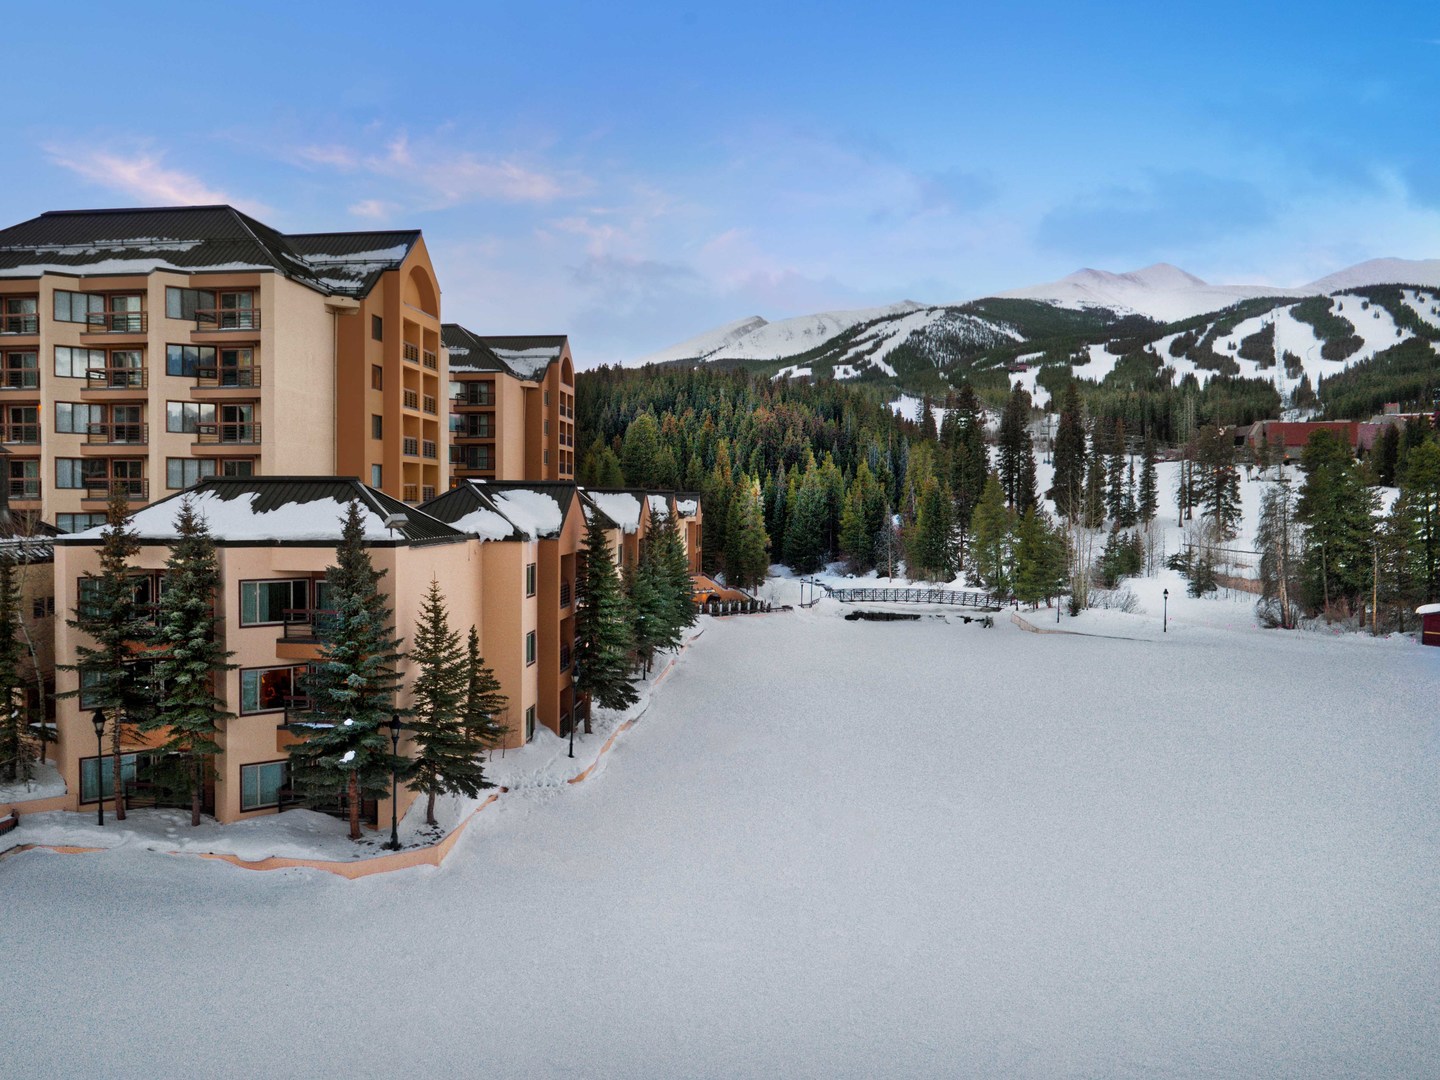 Marriott's Mountain Valley Lodge Resort Exterior, Ski in, Ski out. Marriott's Mountain Valley Lodge is located in Breckenridge, Colorado United States.